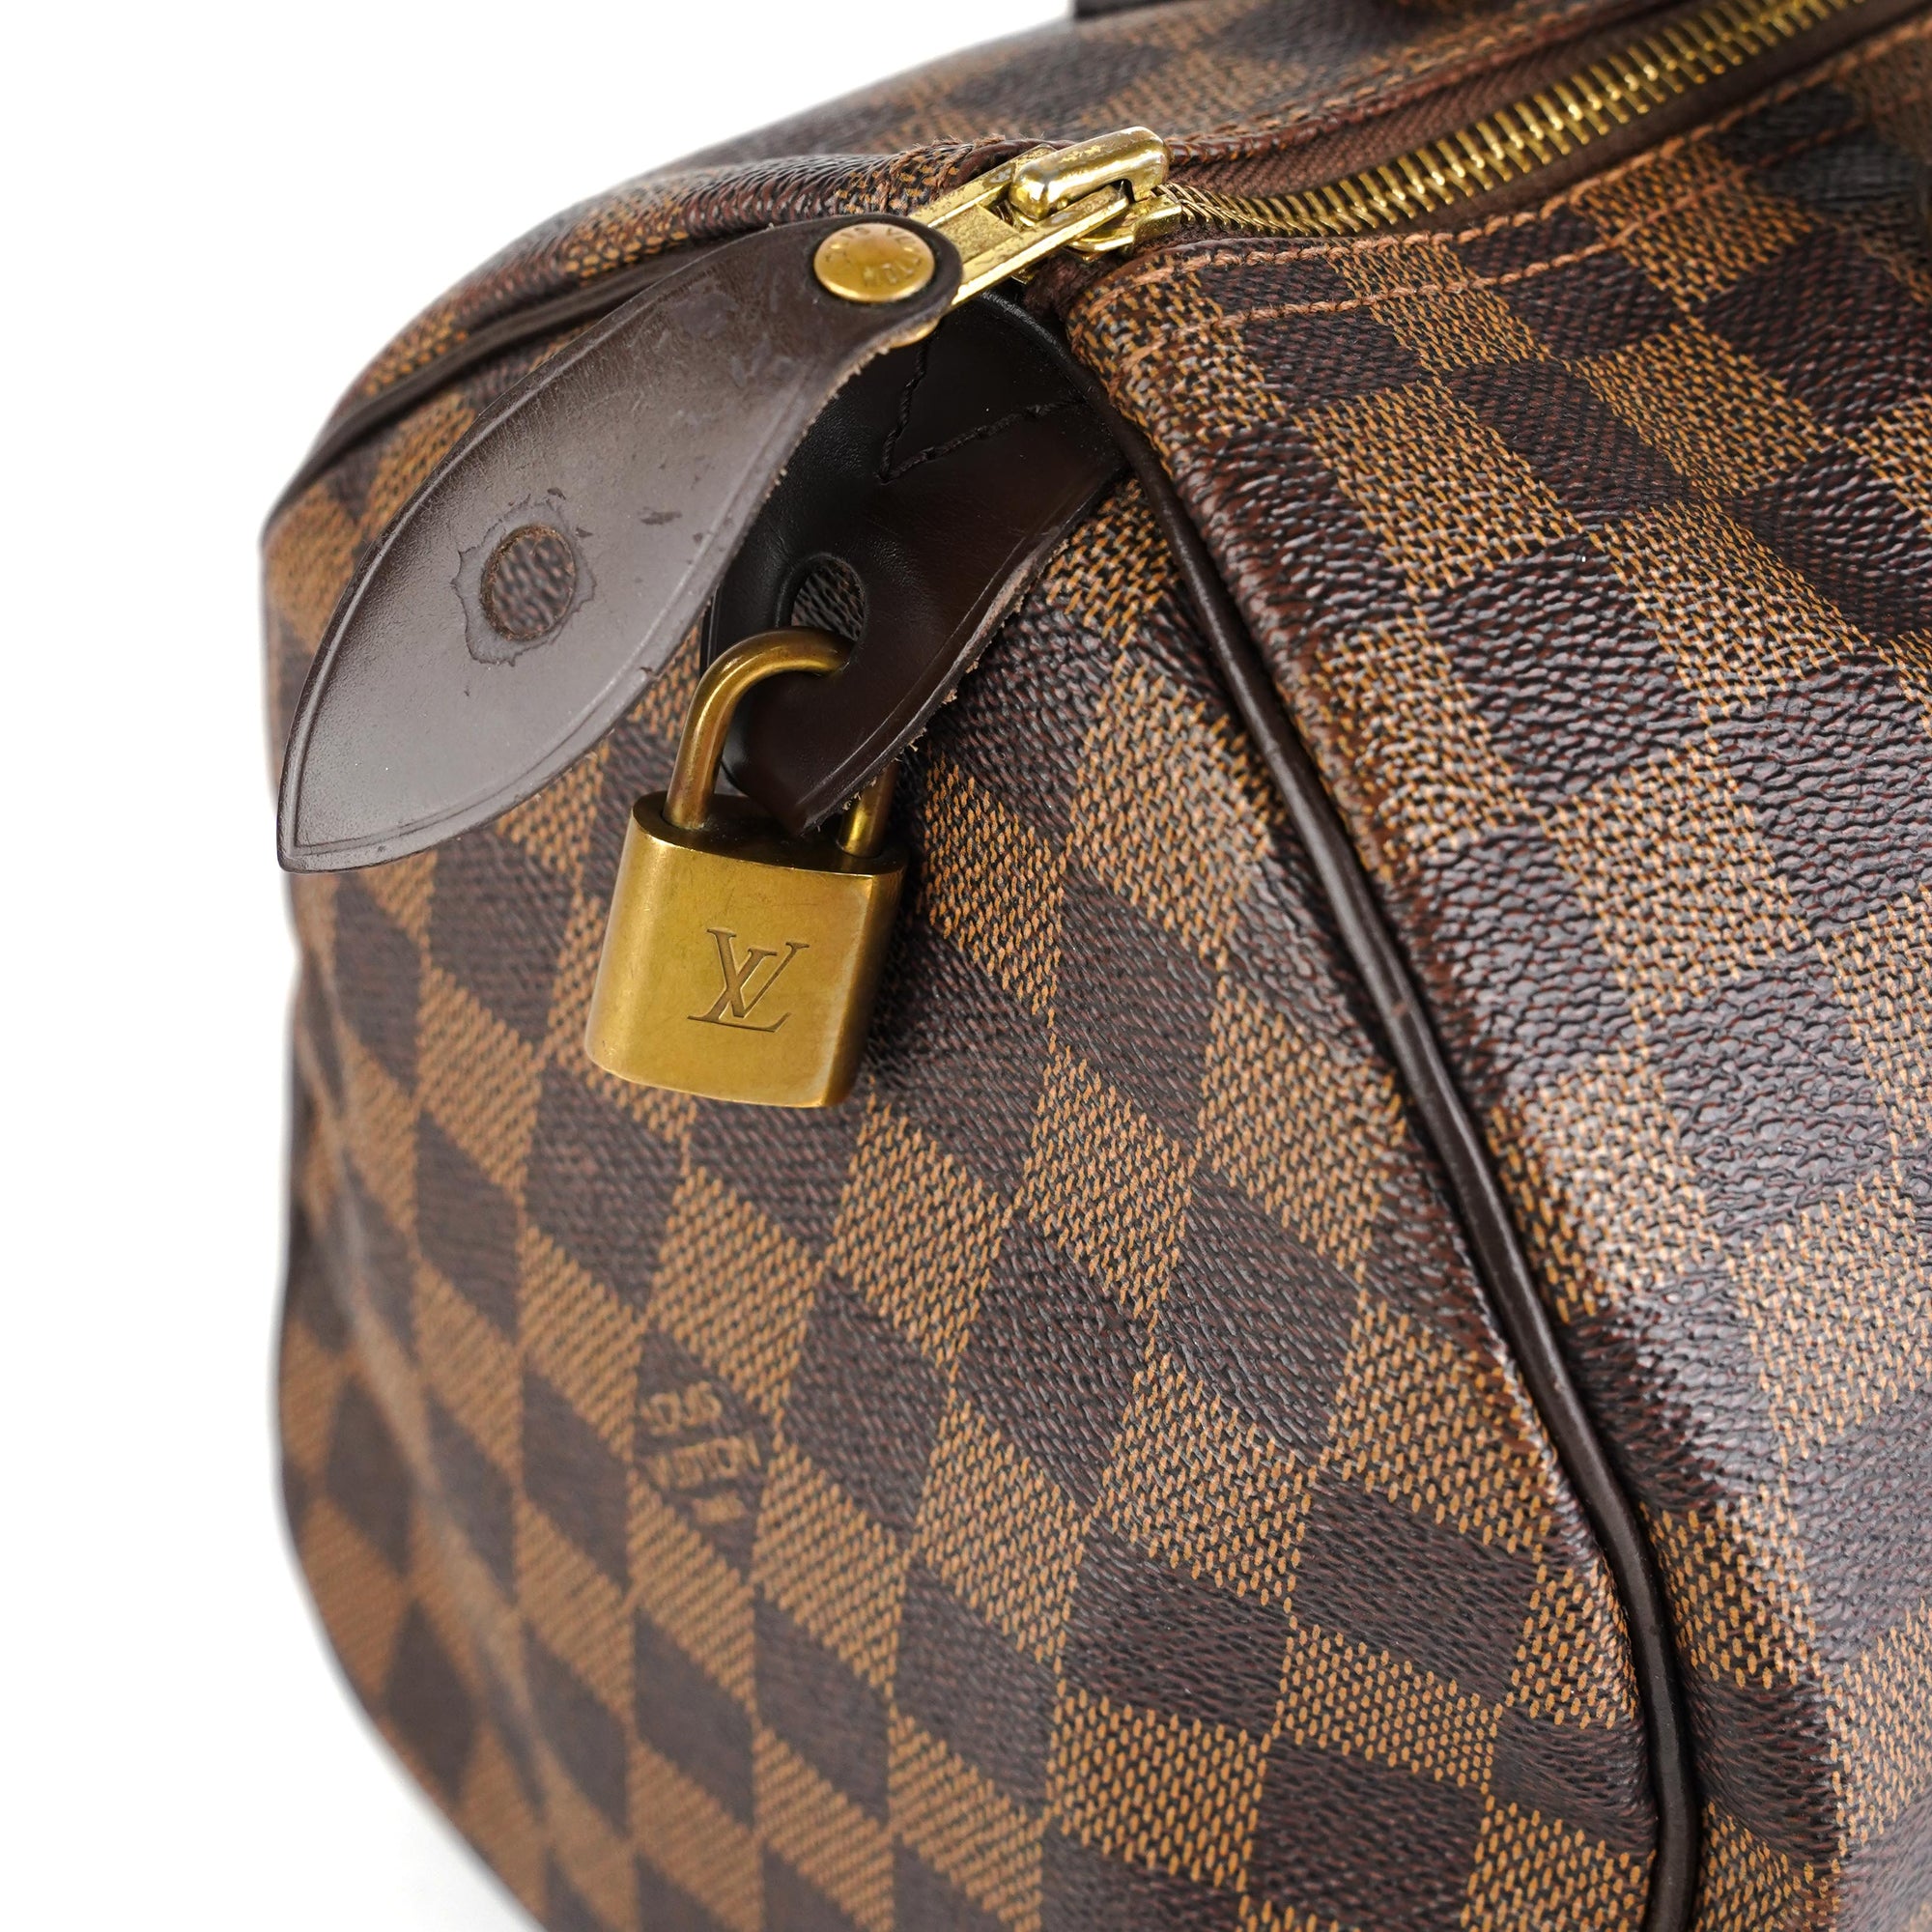 Louis Vuitton's Delusion of the Photographer Results in $3,500 Bag